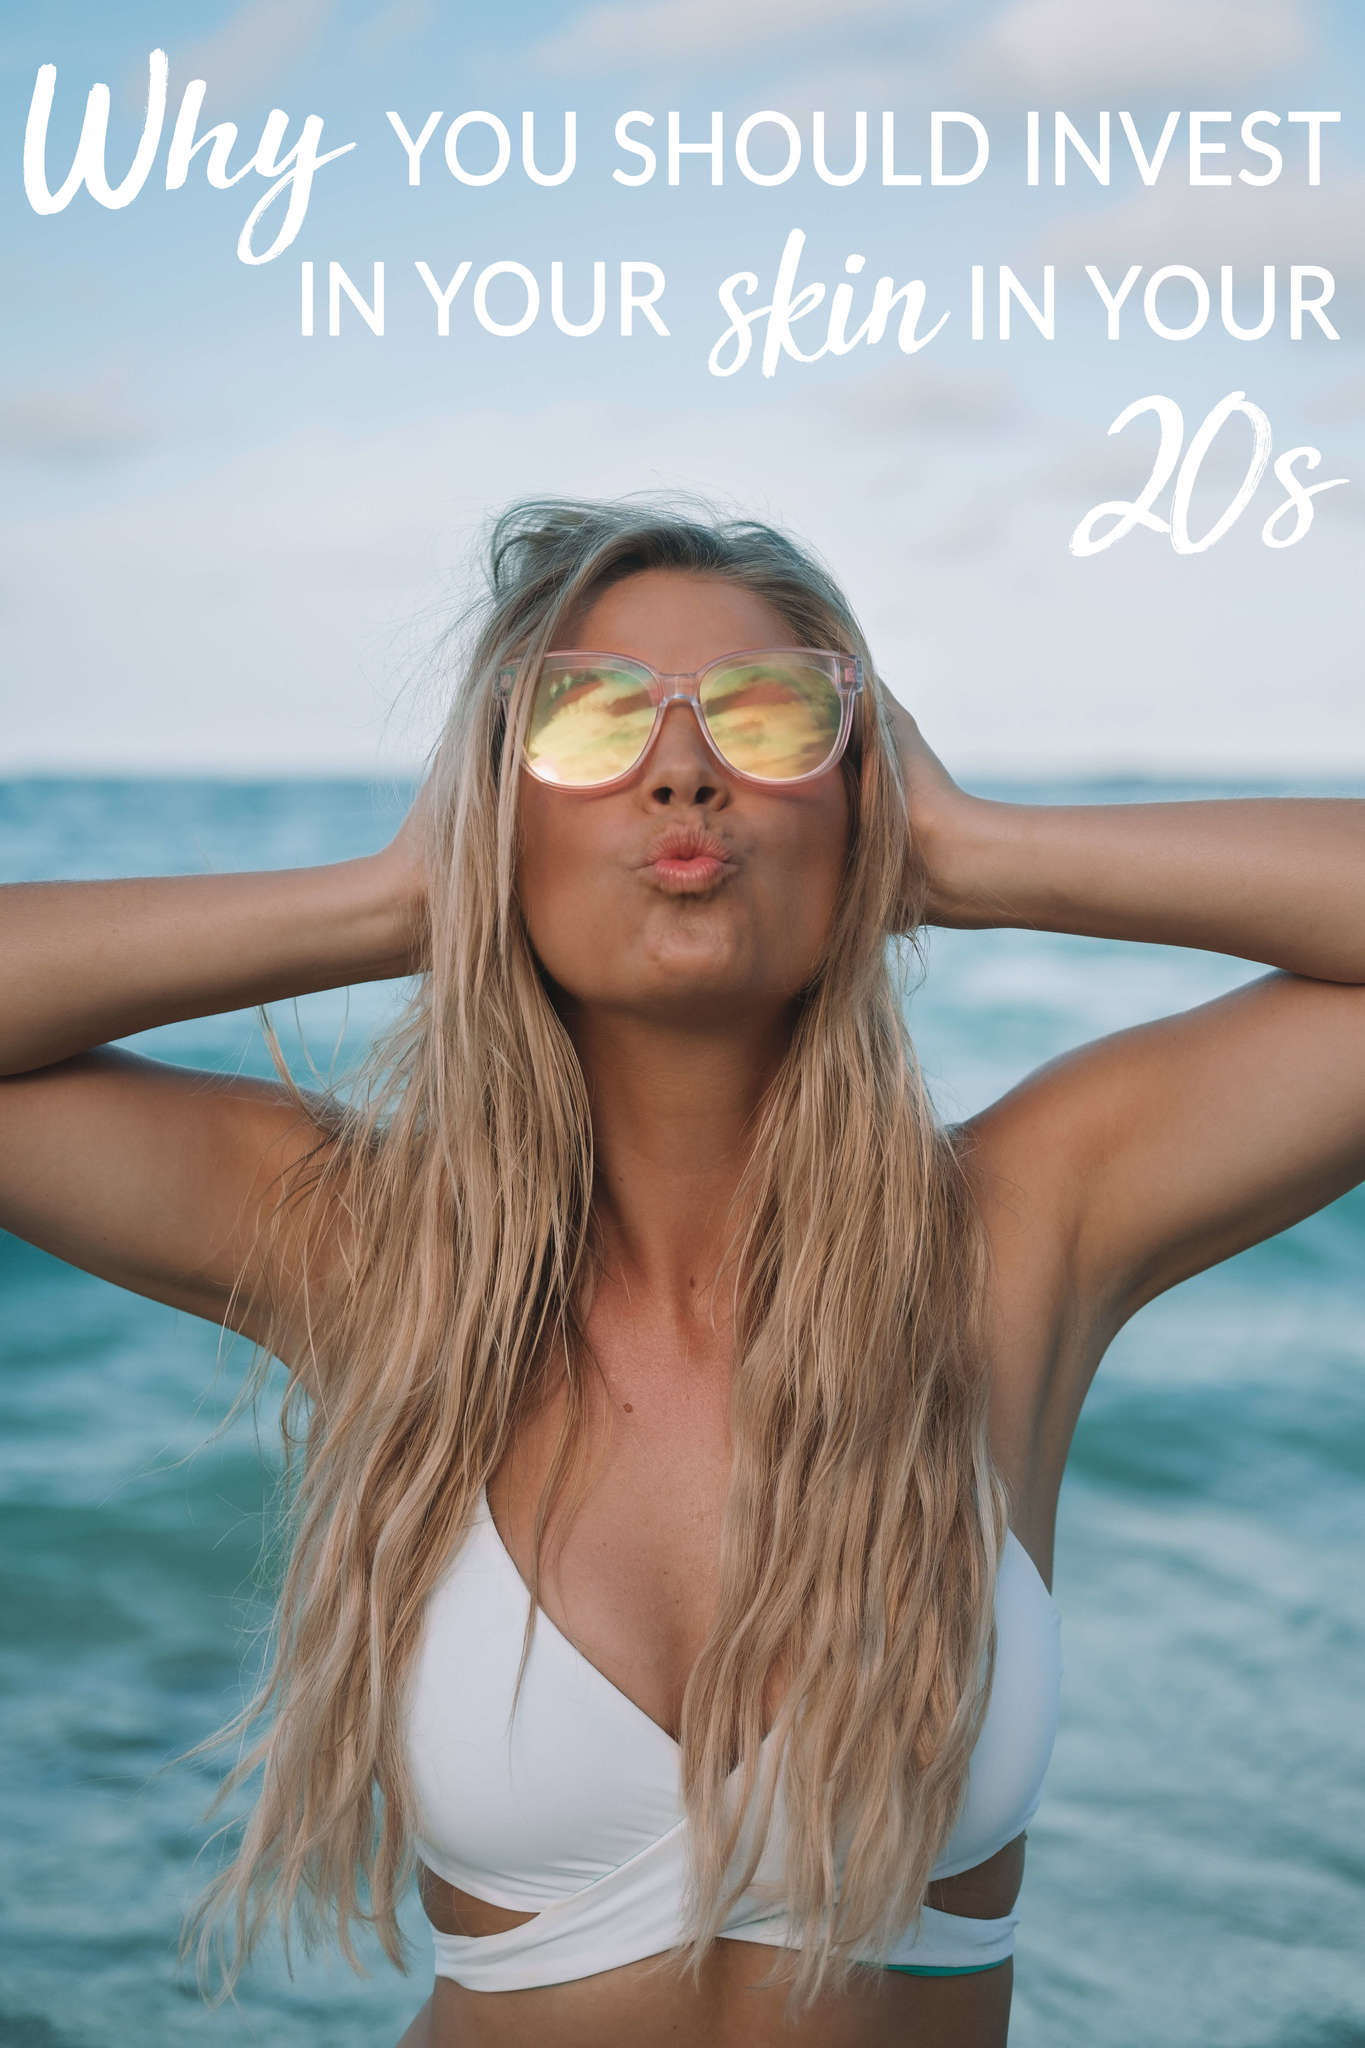 Why You Should Invest in Your Skin in Your 20s